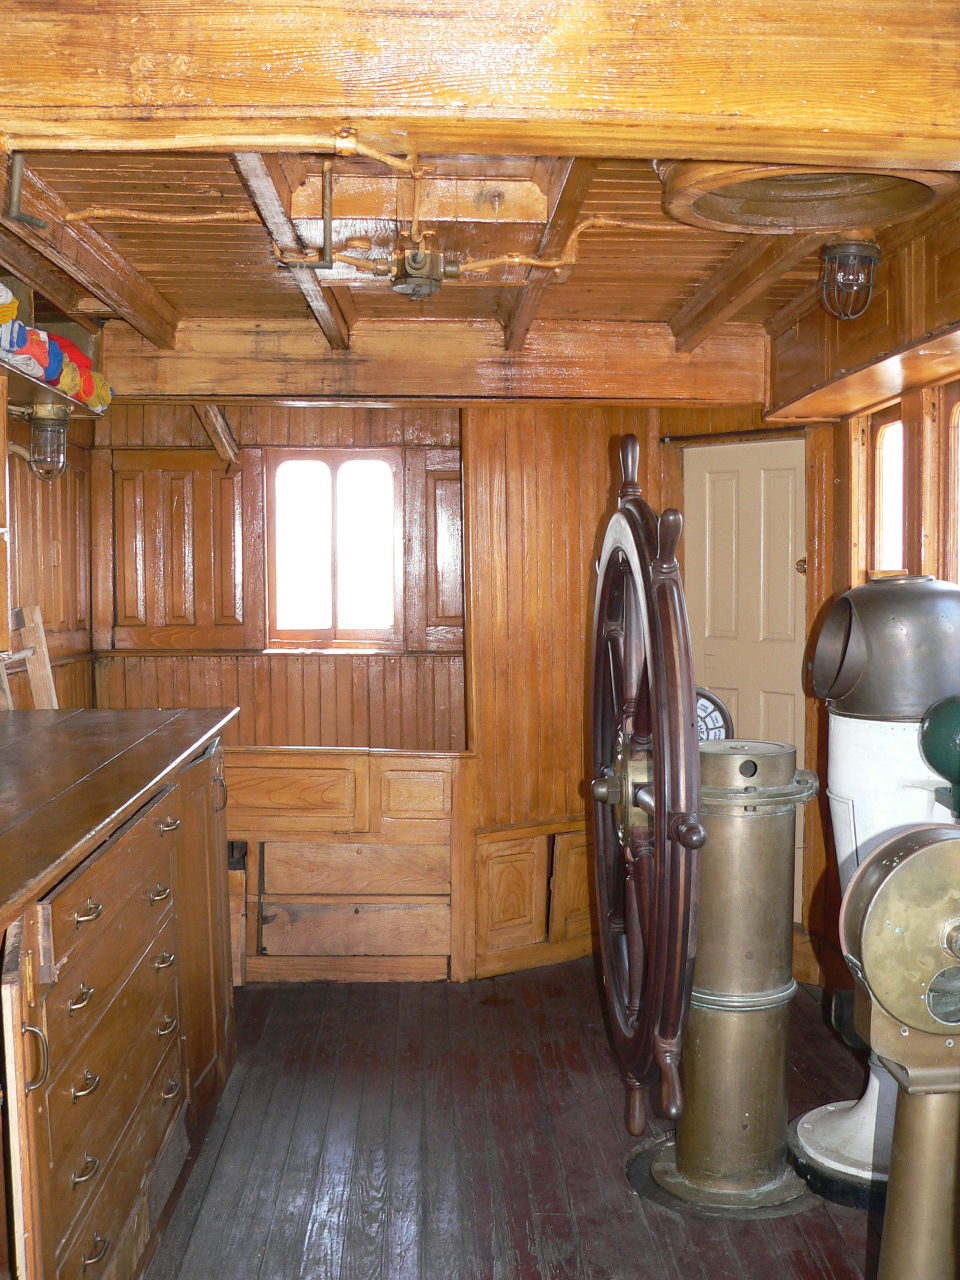 Room with wood panelling and metal machinery.